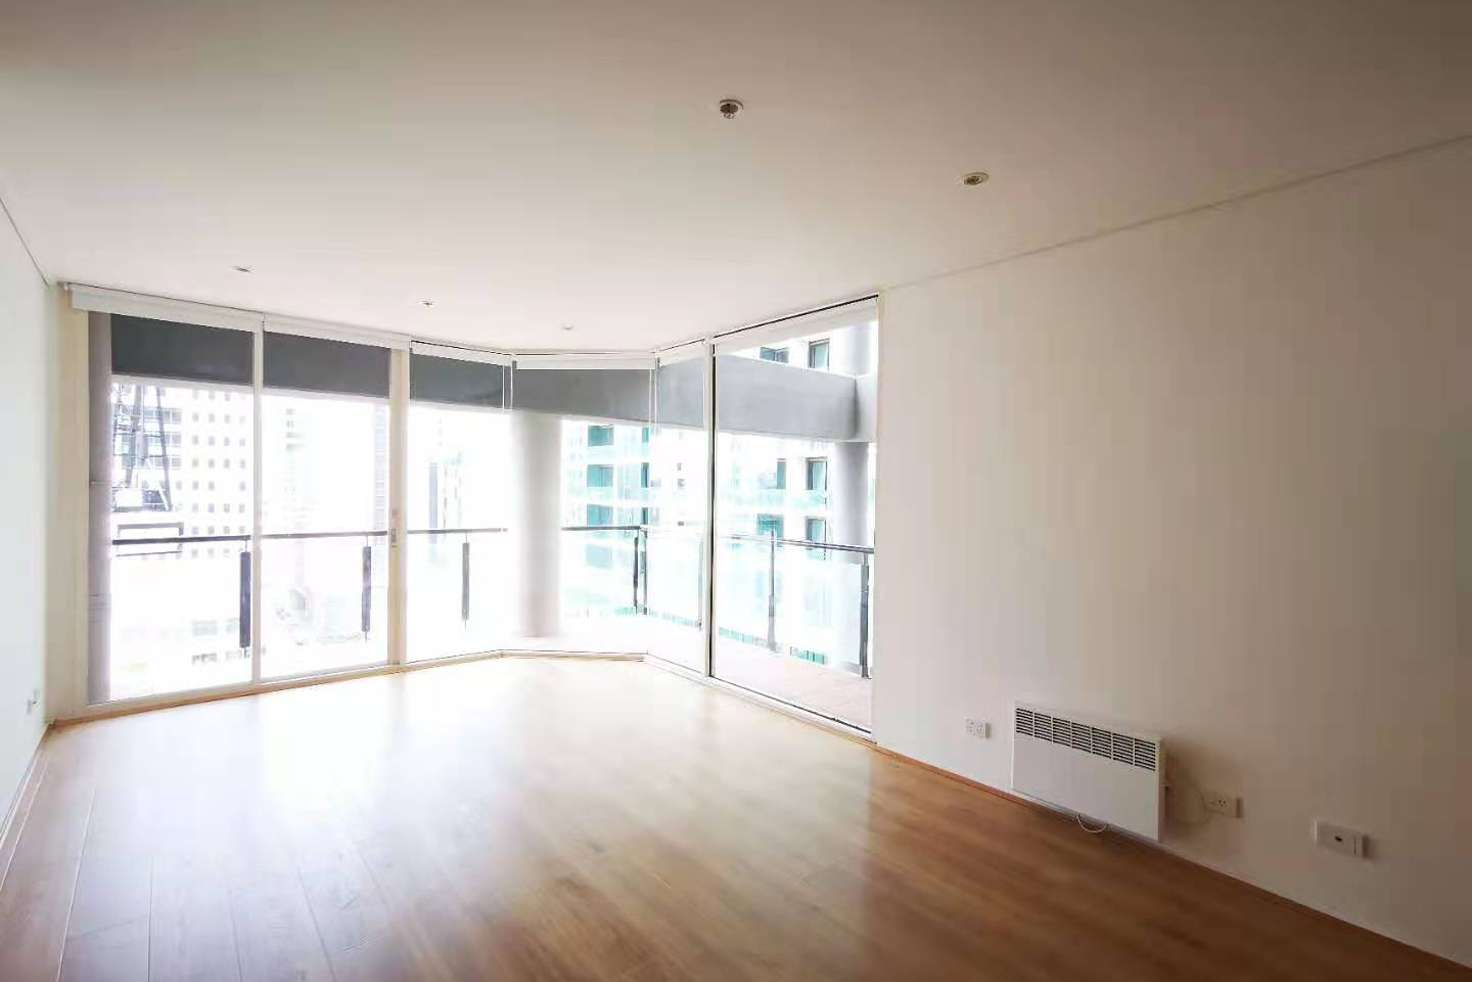 Main view of Homely apartment listing, 112/538 LITTLE LONSDALE ST, Melbourne VIC 3000